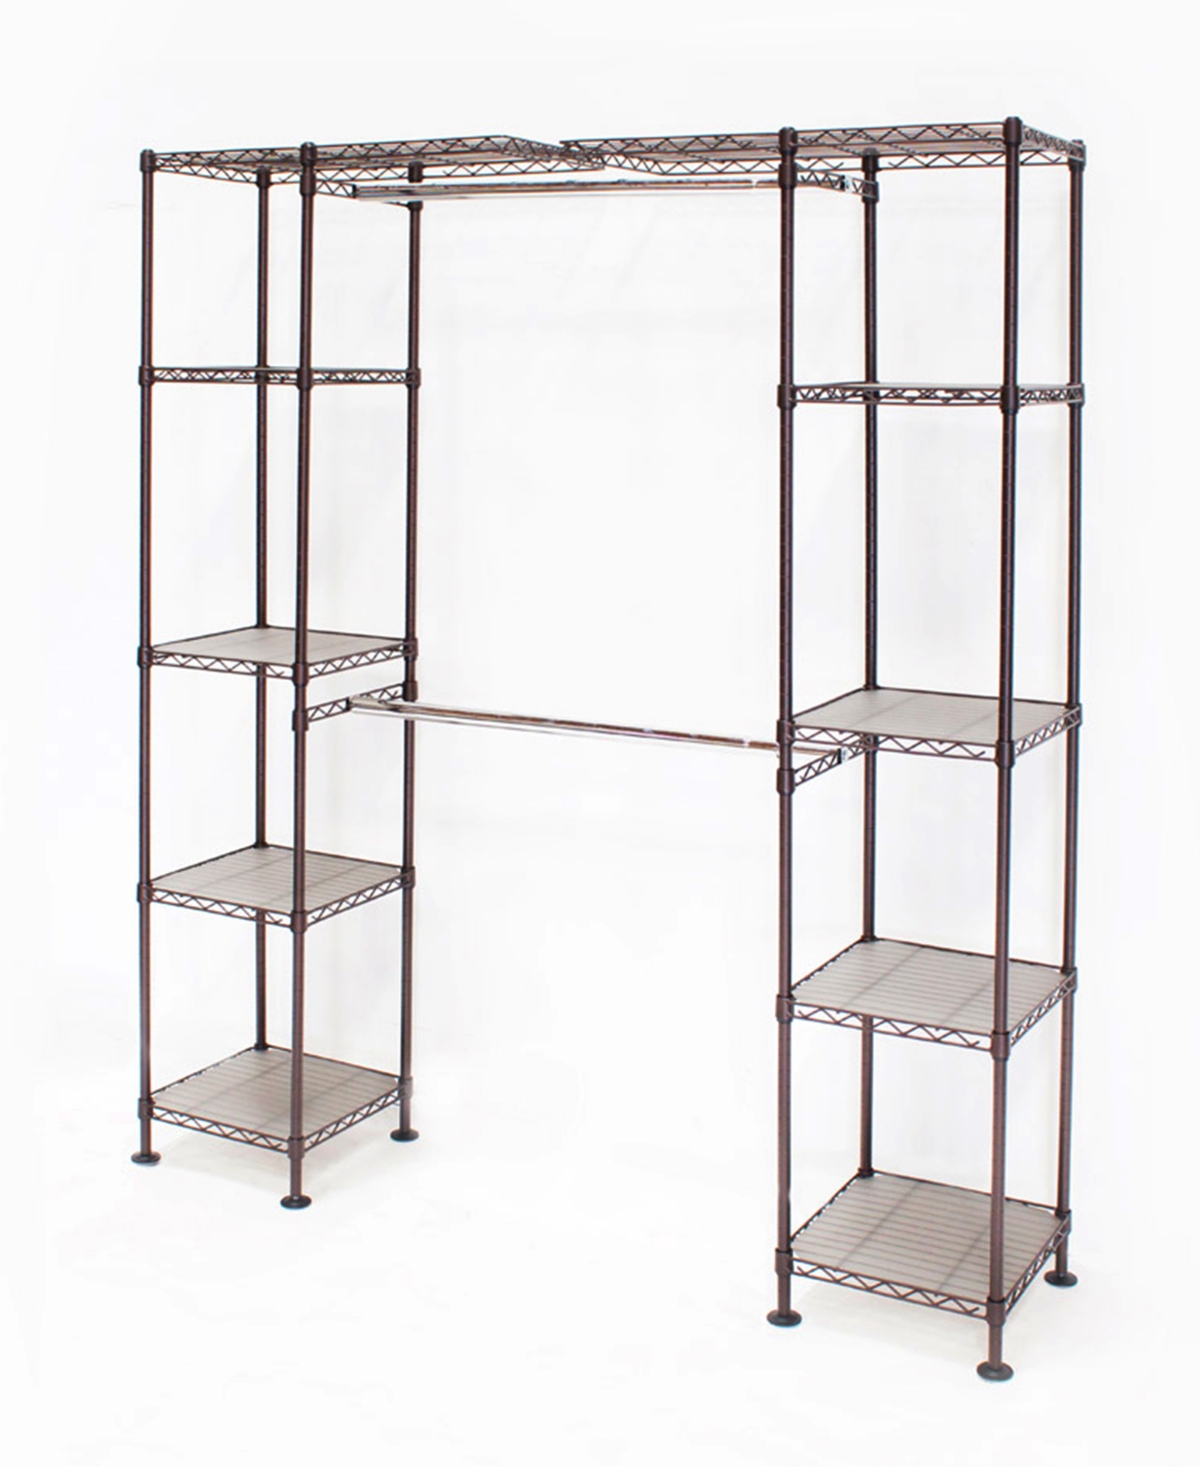 Expandable Closet Organizer System - Plated Steel